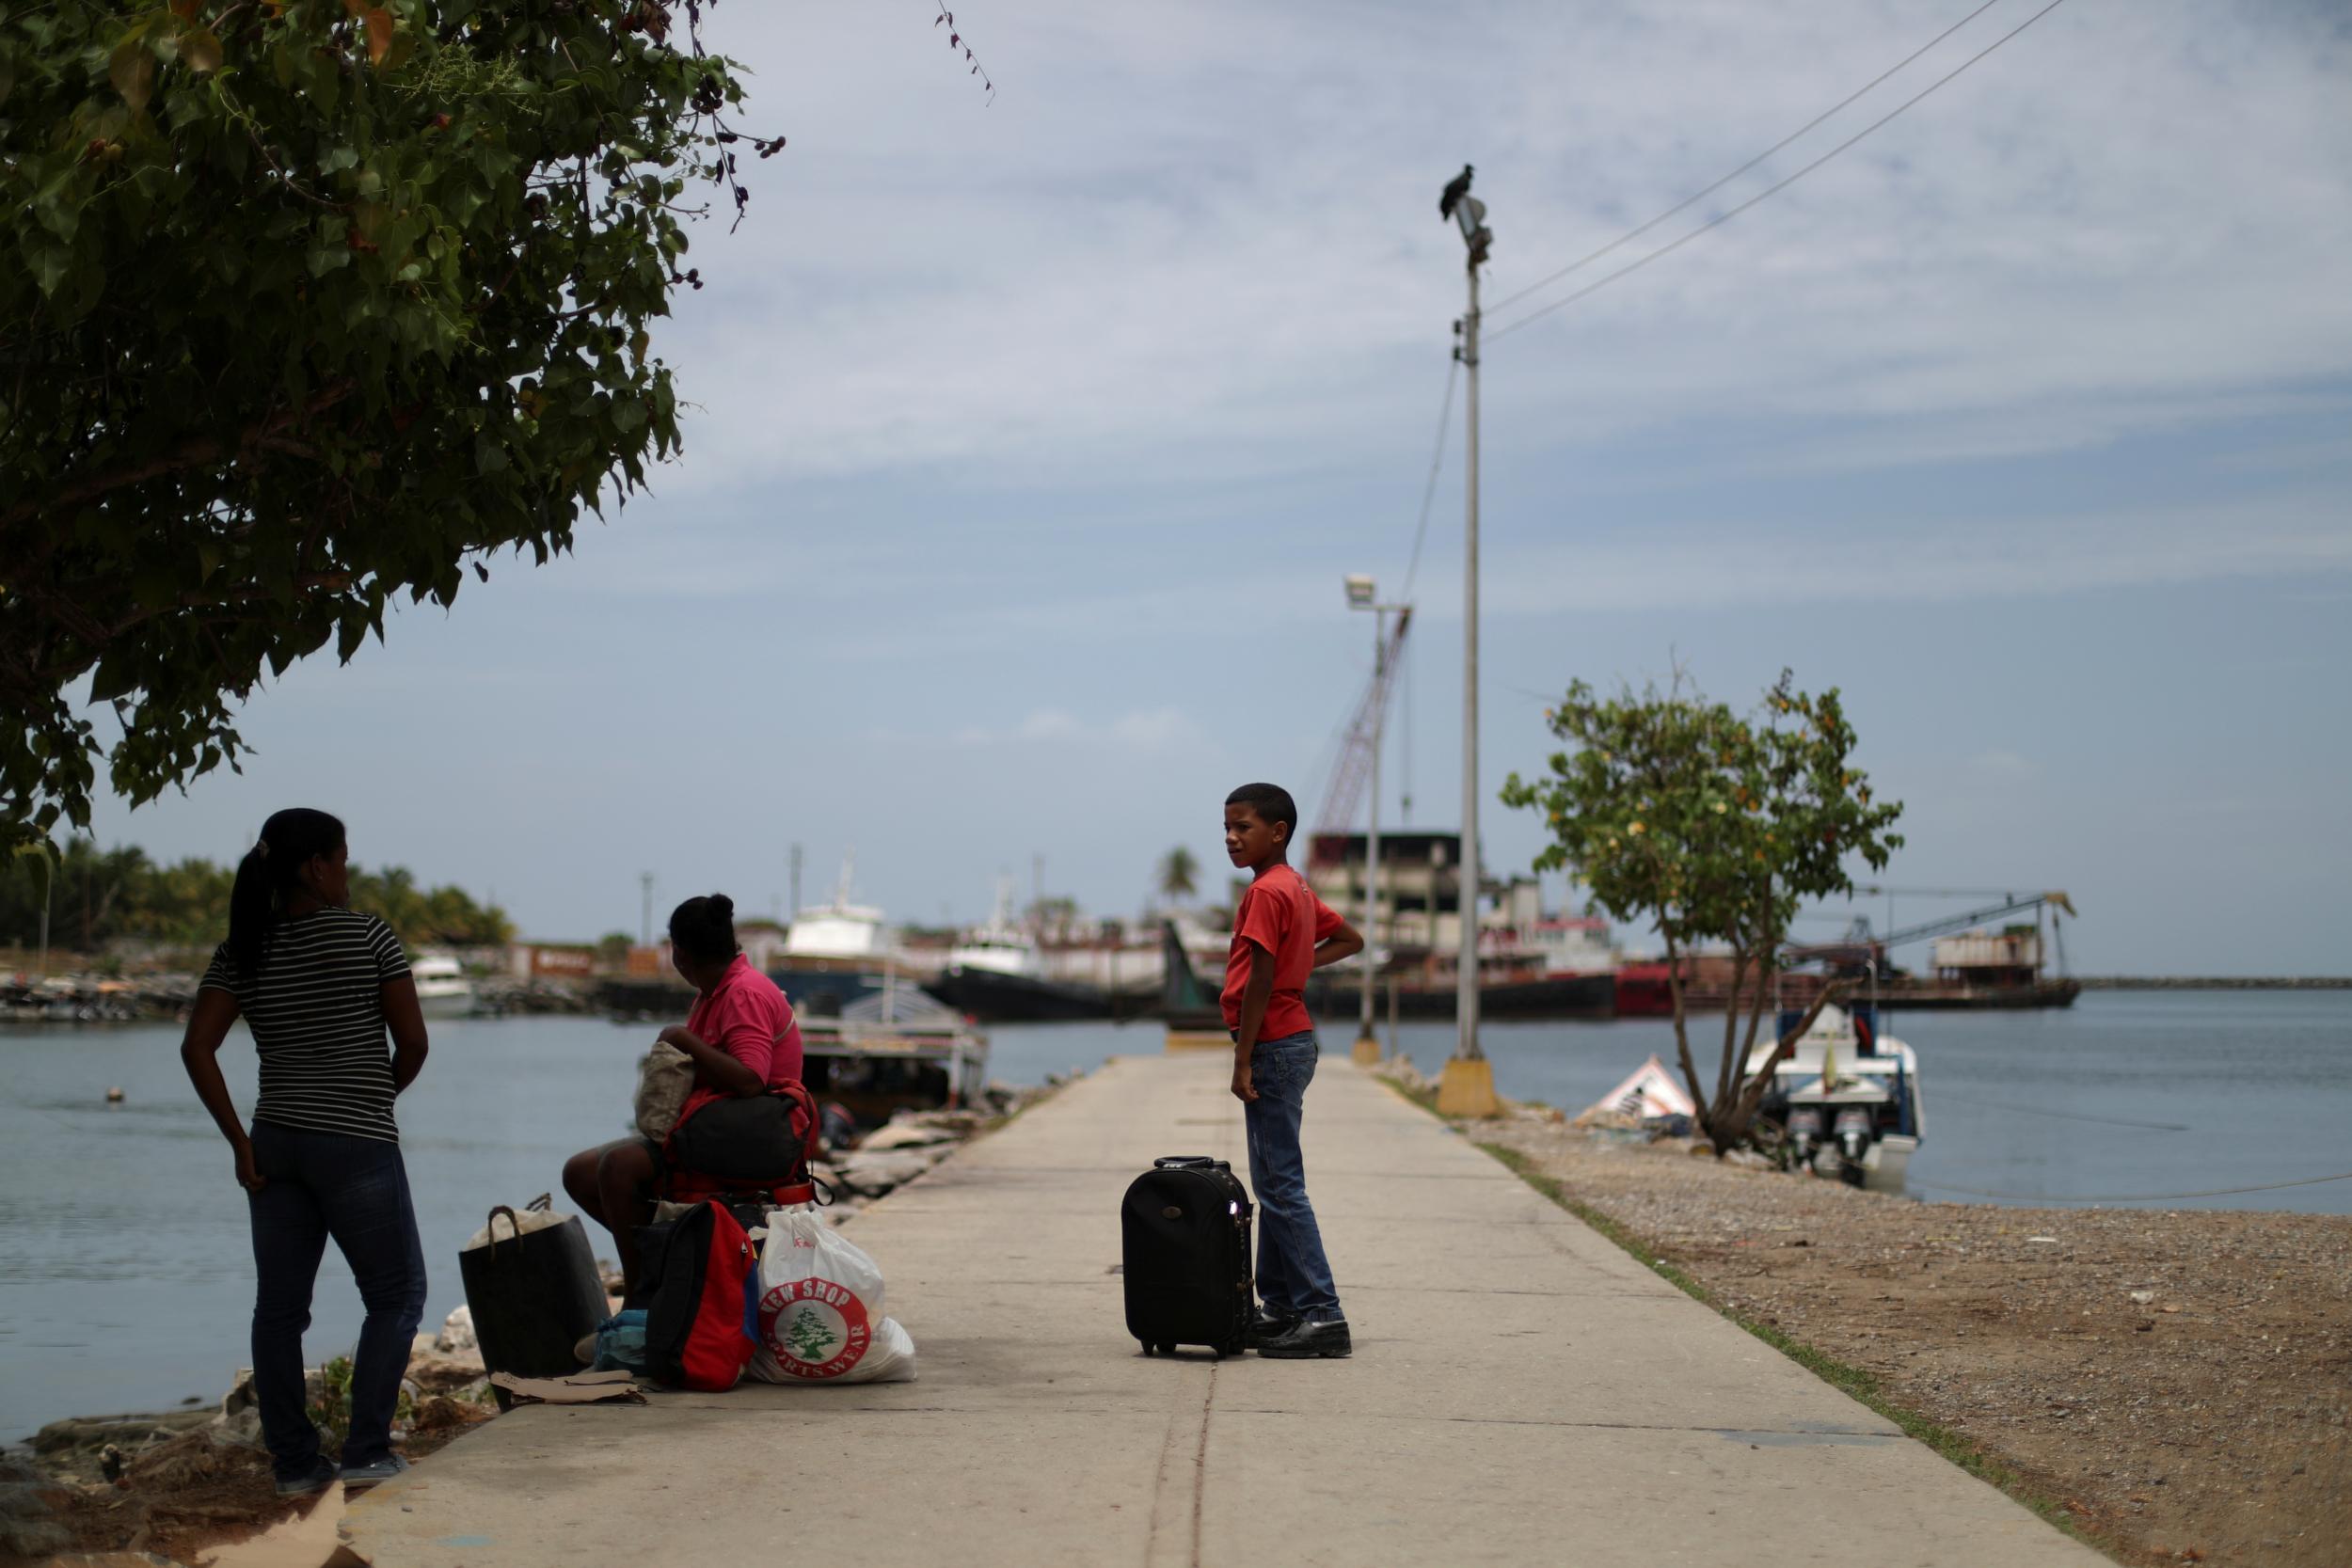 Local residents wait for a boat in a dock at Guiria, Venezuela (Reuters)